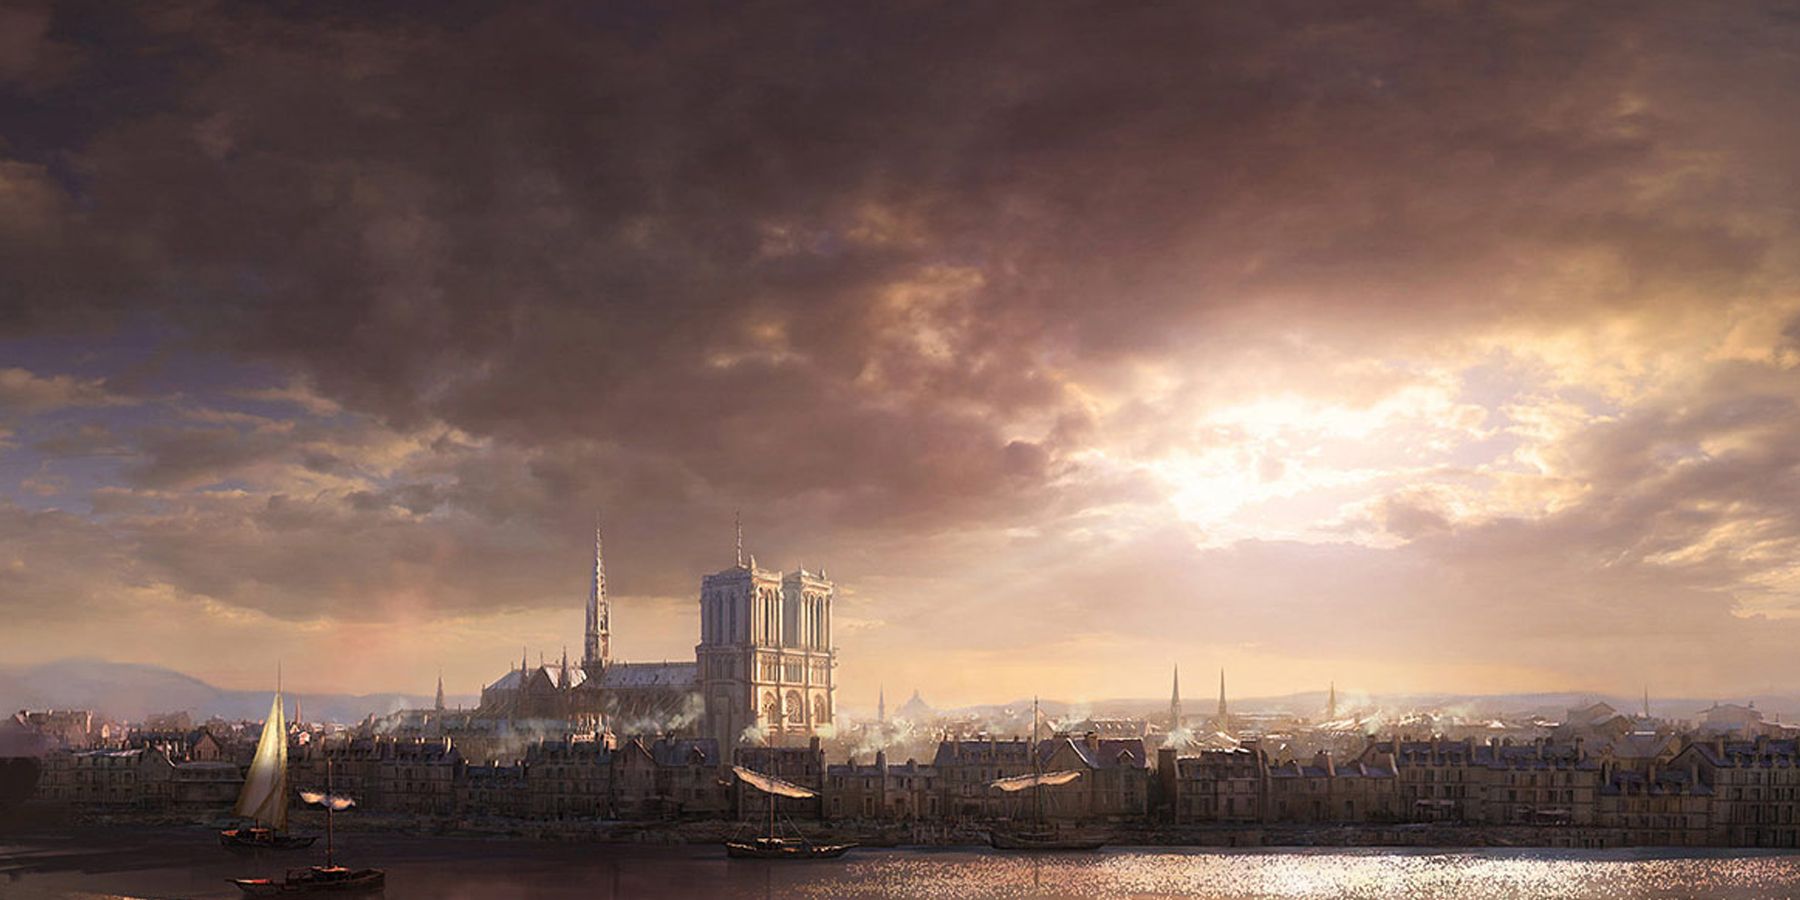 Notre Dame from art for Assassin's Creed Unity.